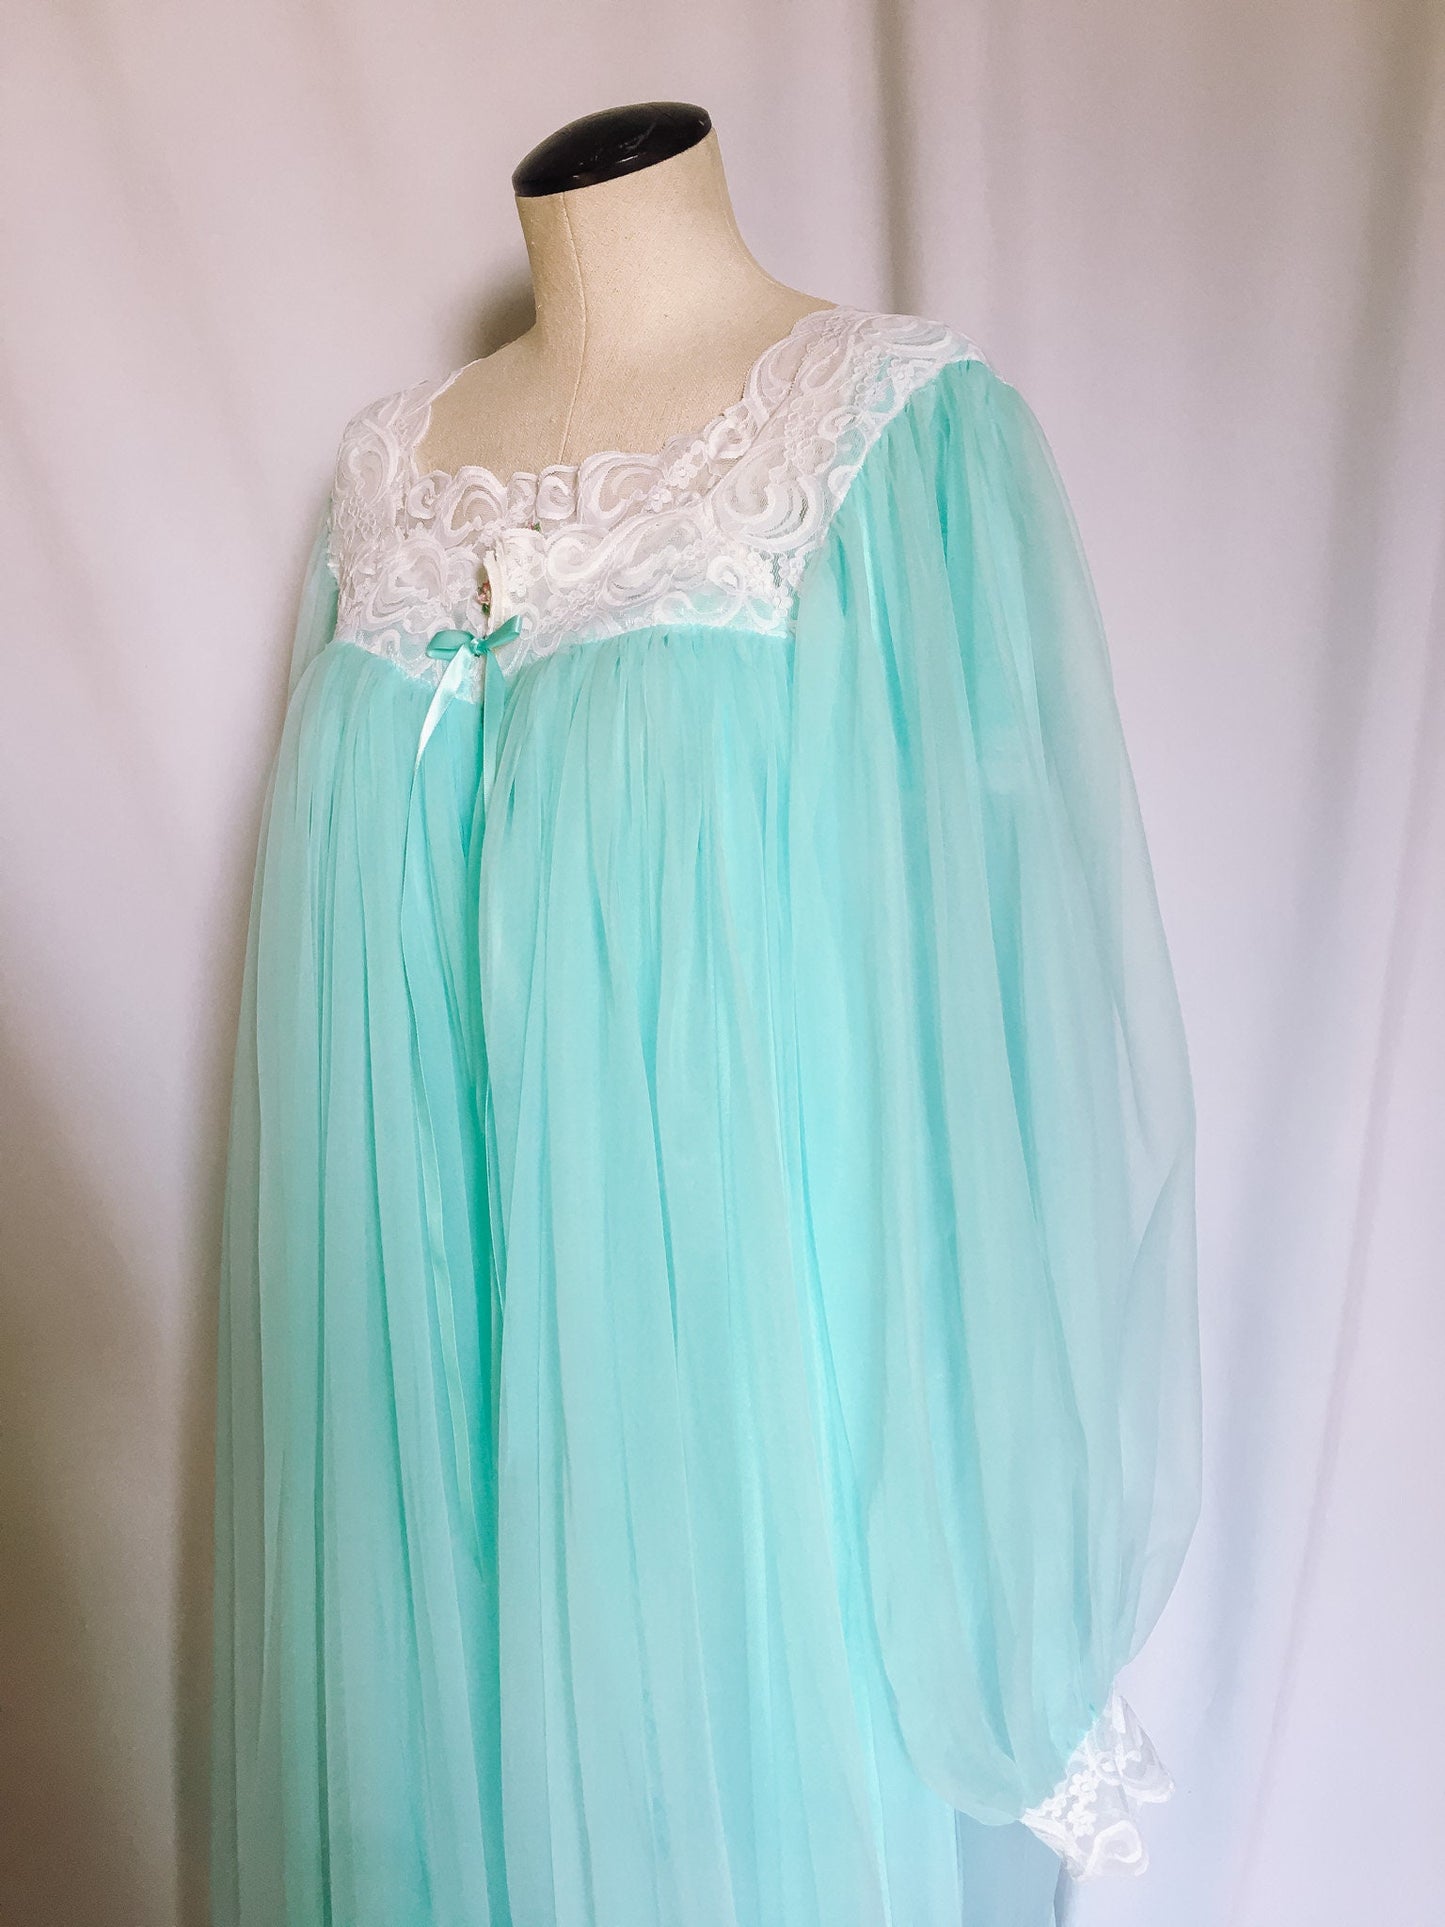 Vintage Blue Peignoir Short-sleeved Nightgown with Matching Long-sleeved Cover Up